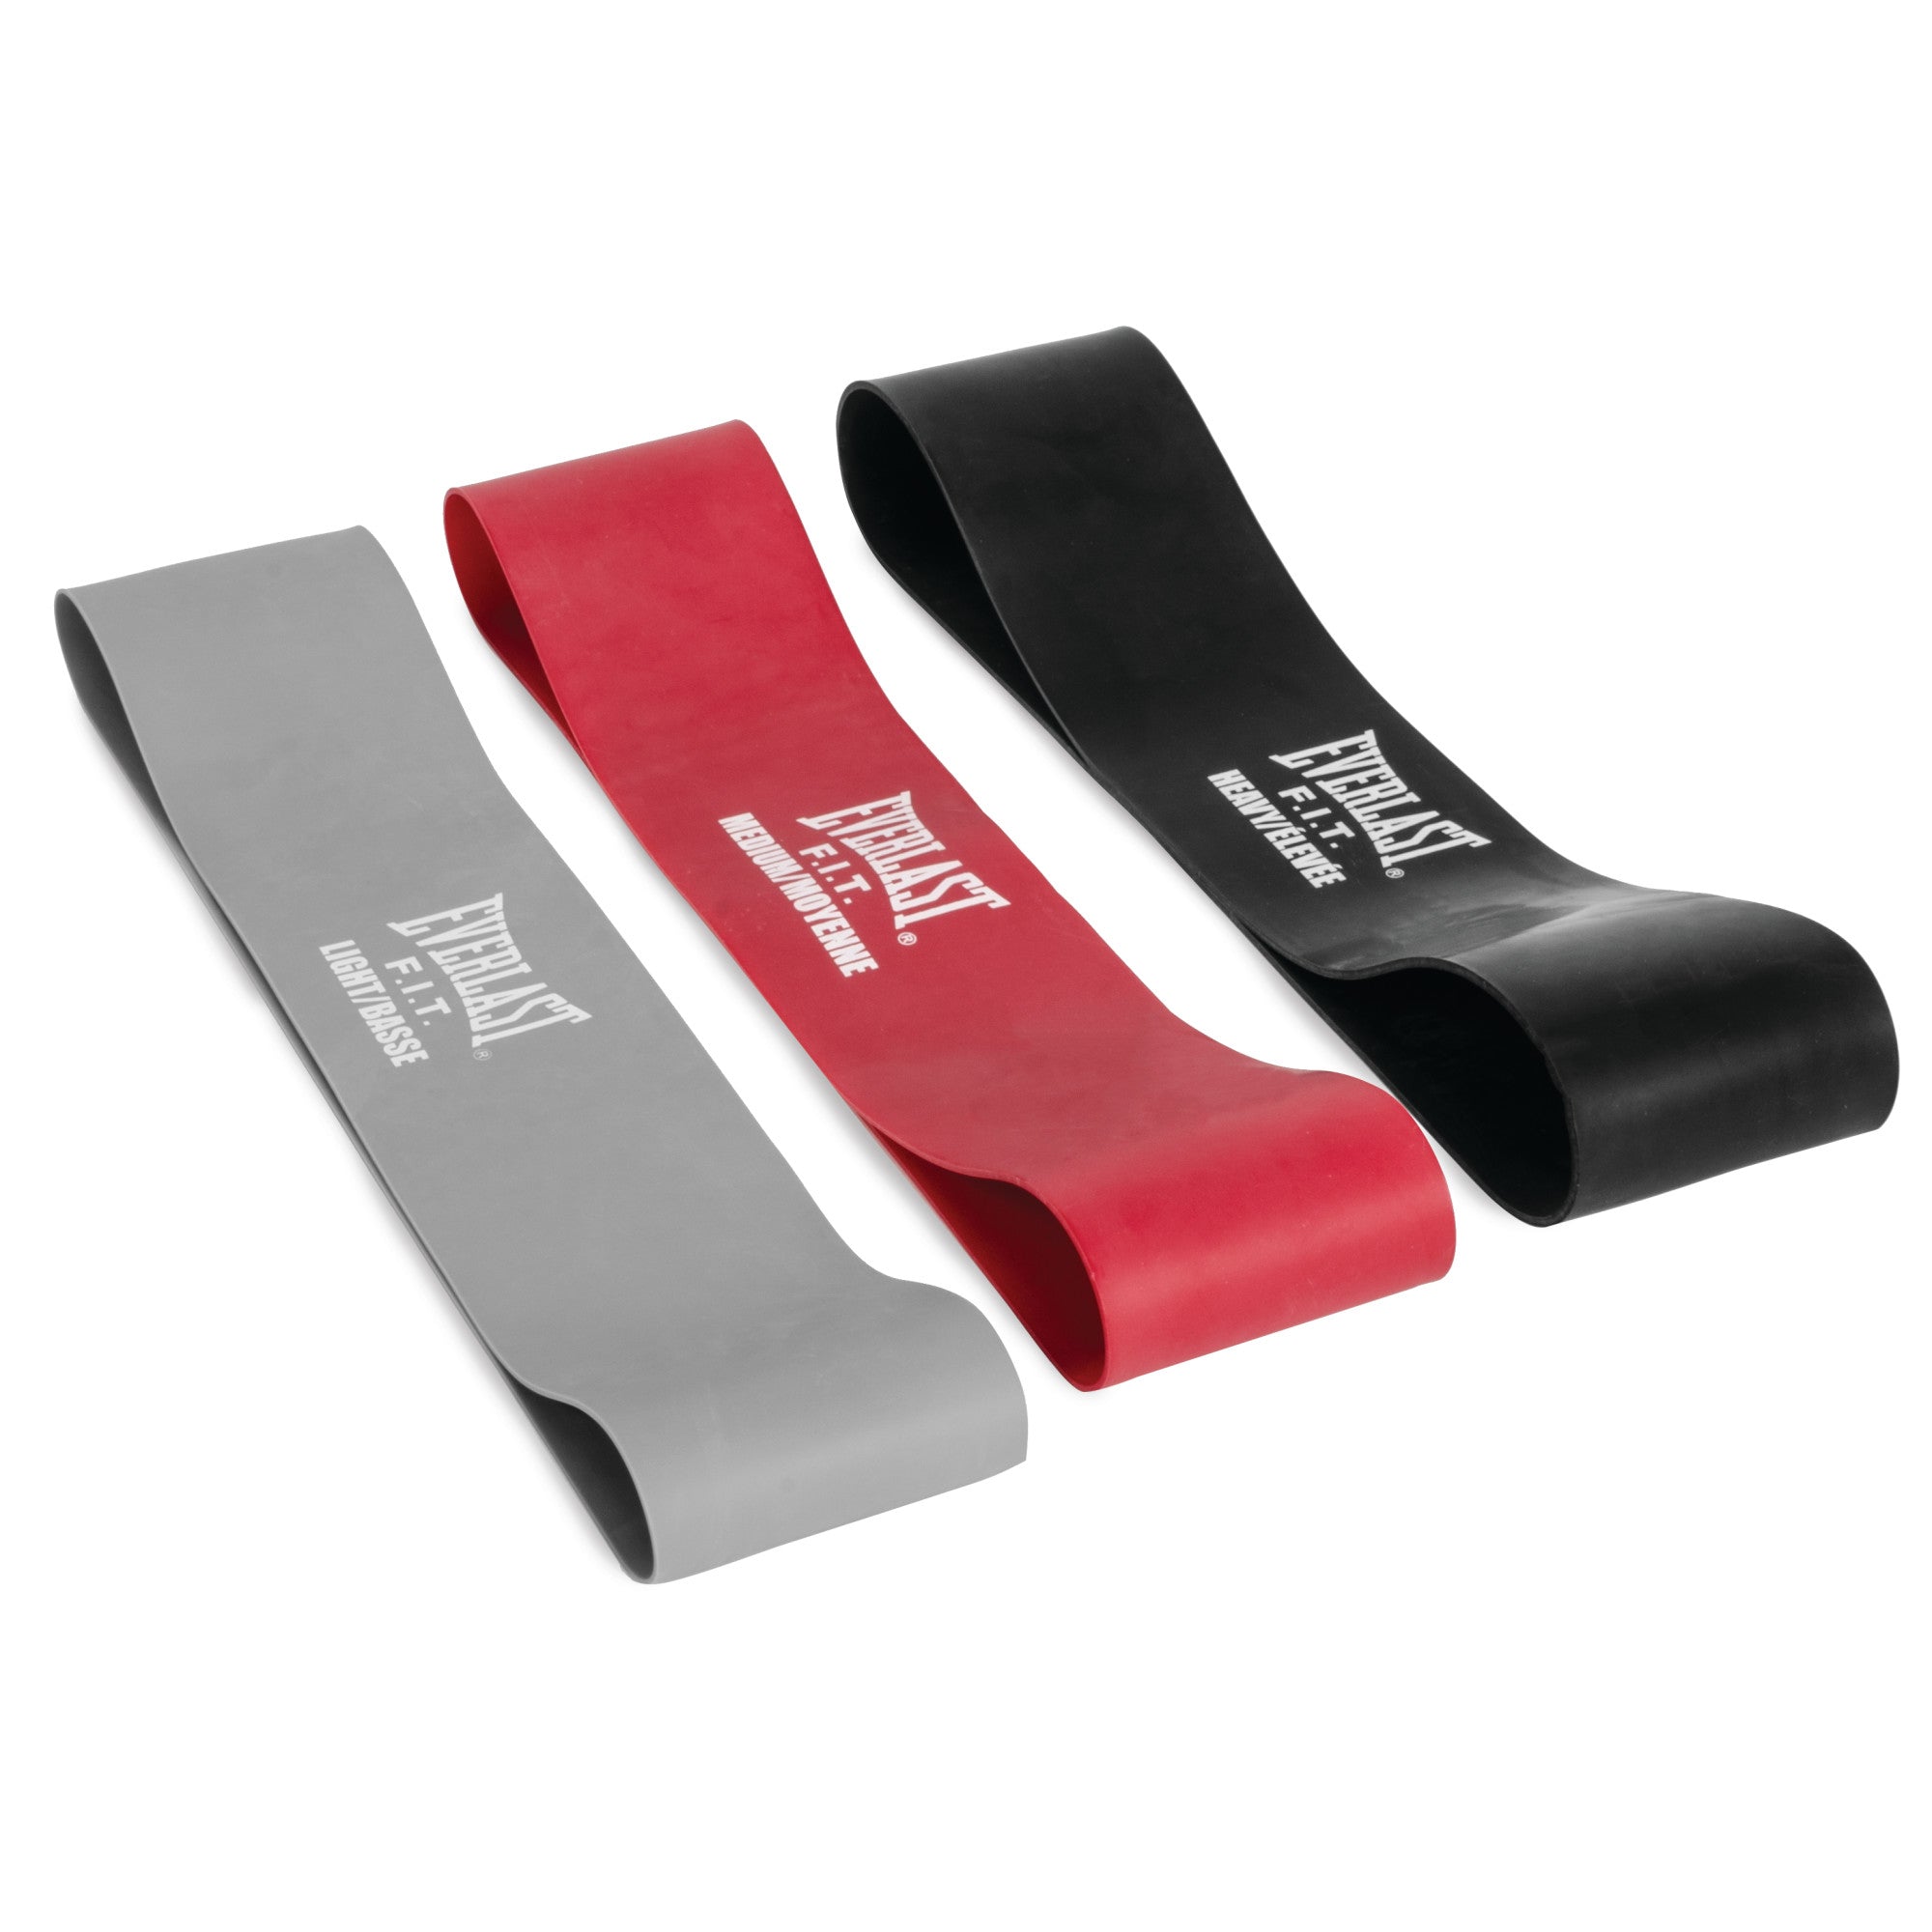 Everlast Lateral Resistance Bands - Set Of 3 - EE6941AS